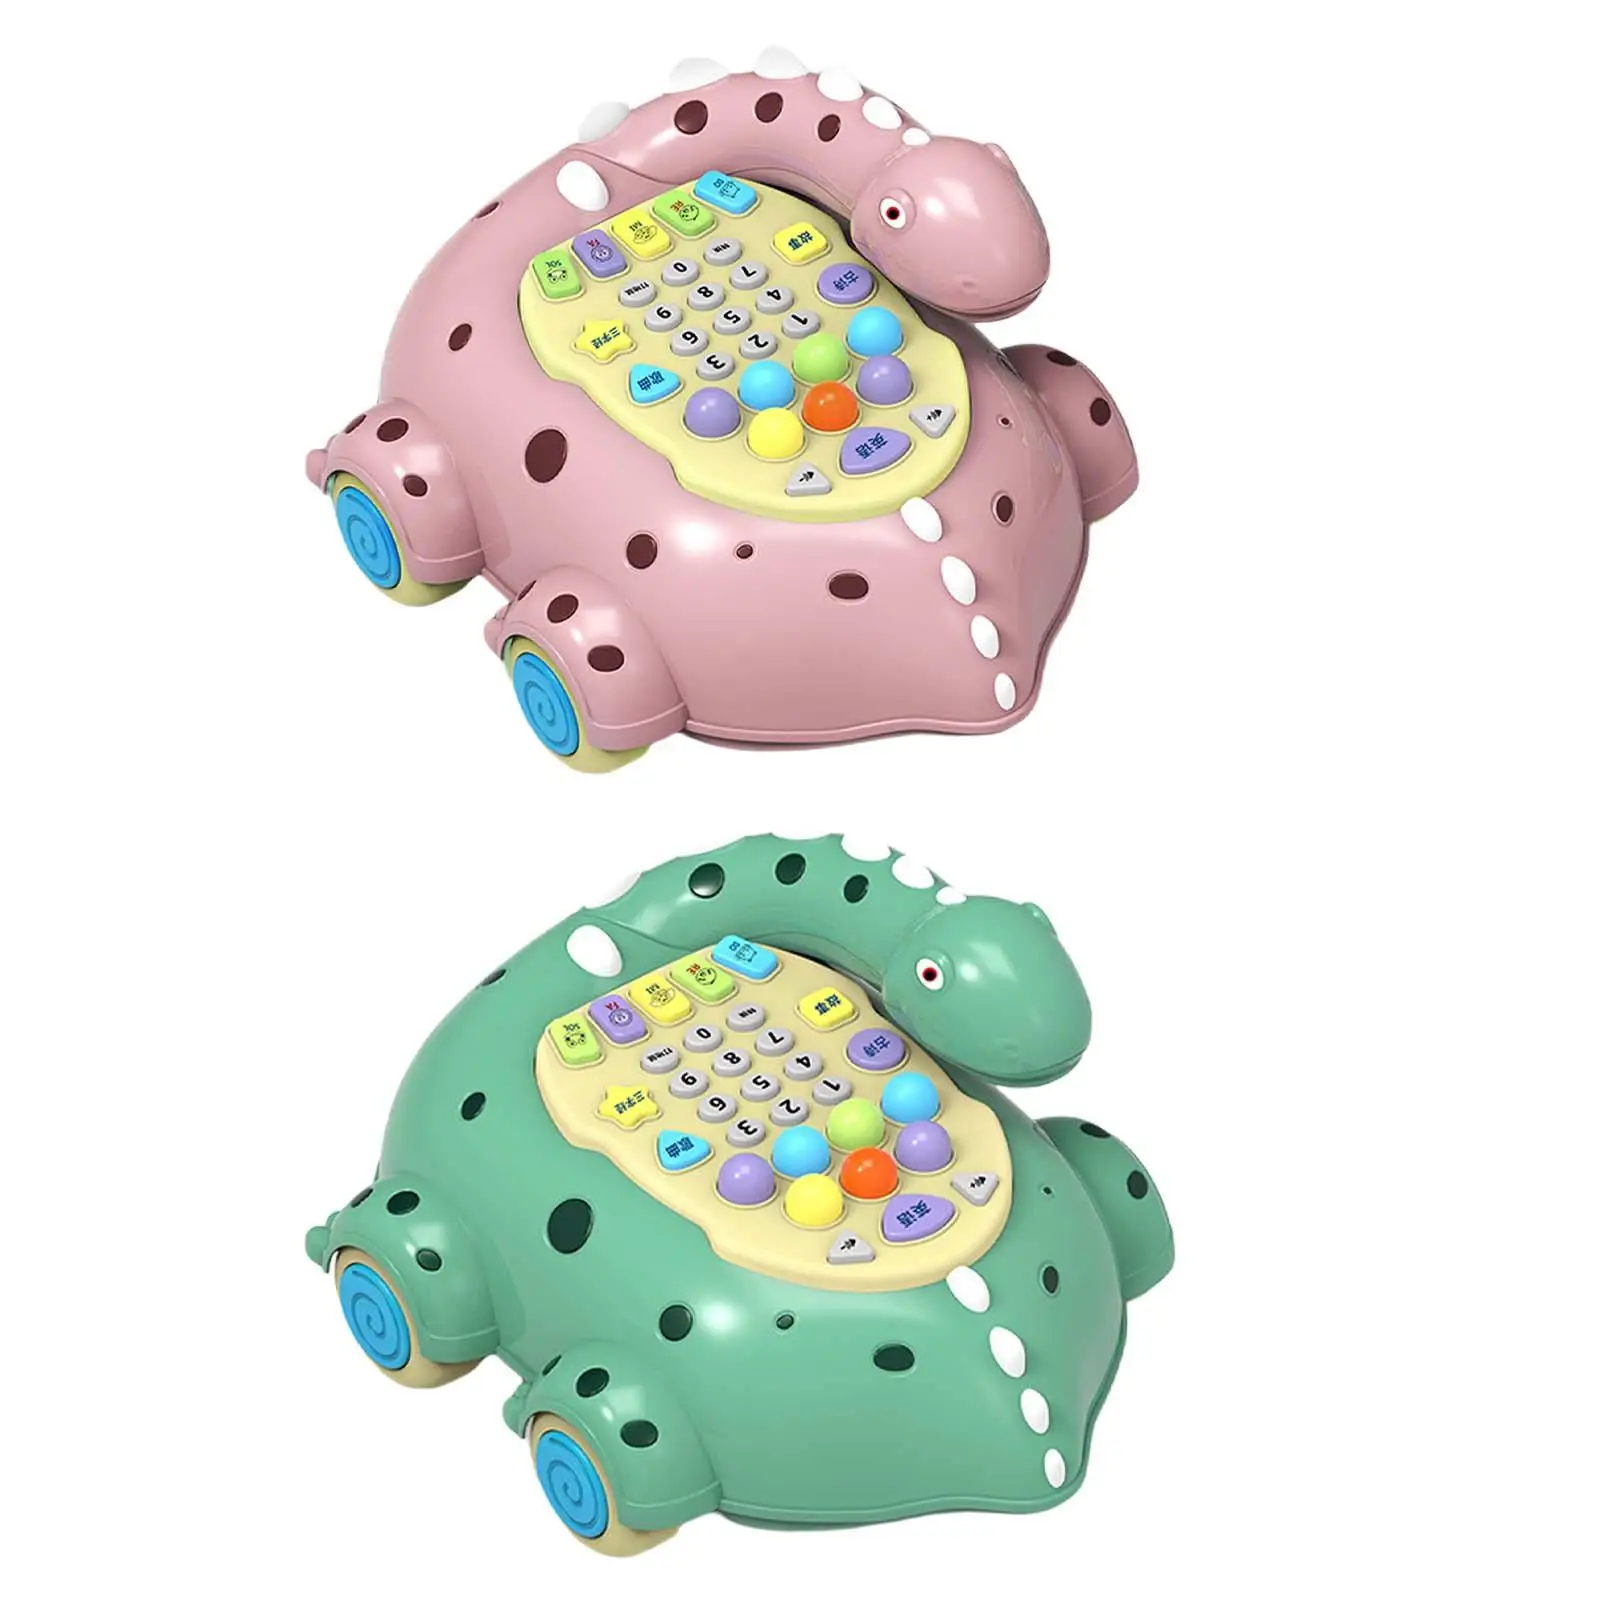 Kids Musical Telephone Toys Car Pull Toys Multifunctional Baby Telephone Toy for Game Activity Sensory Learning Preschool